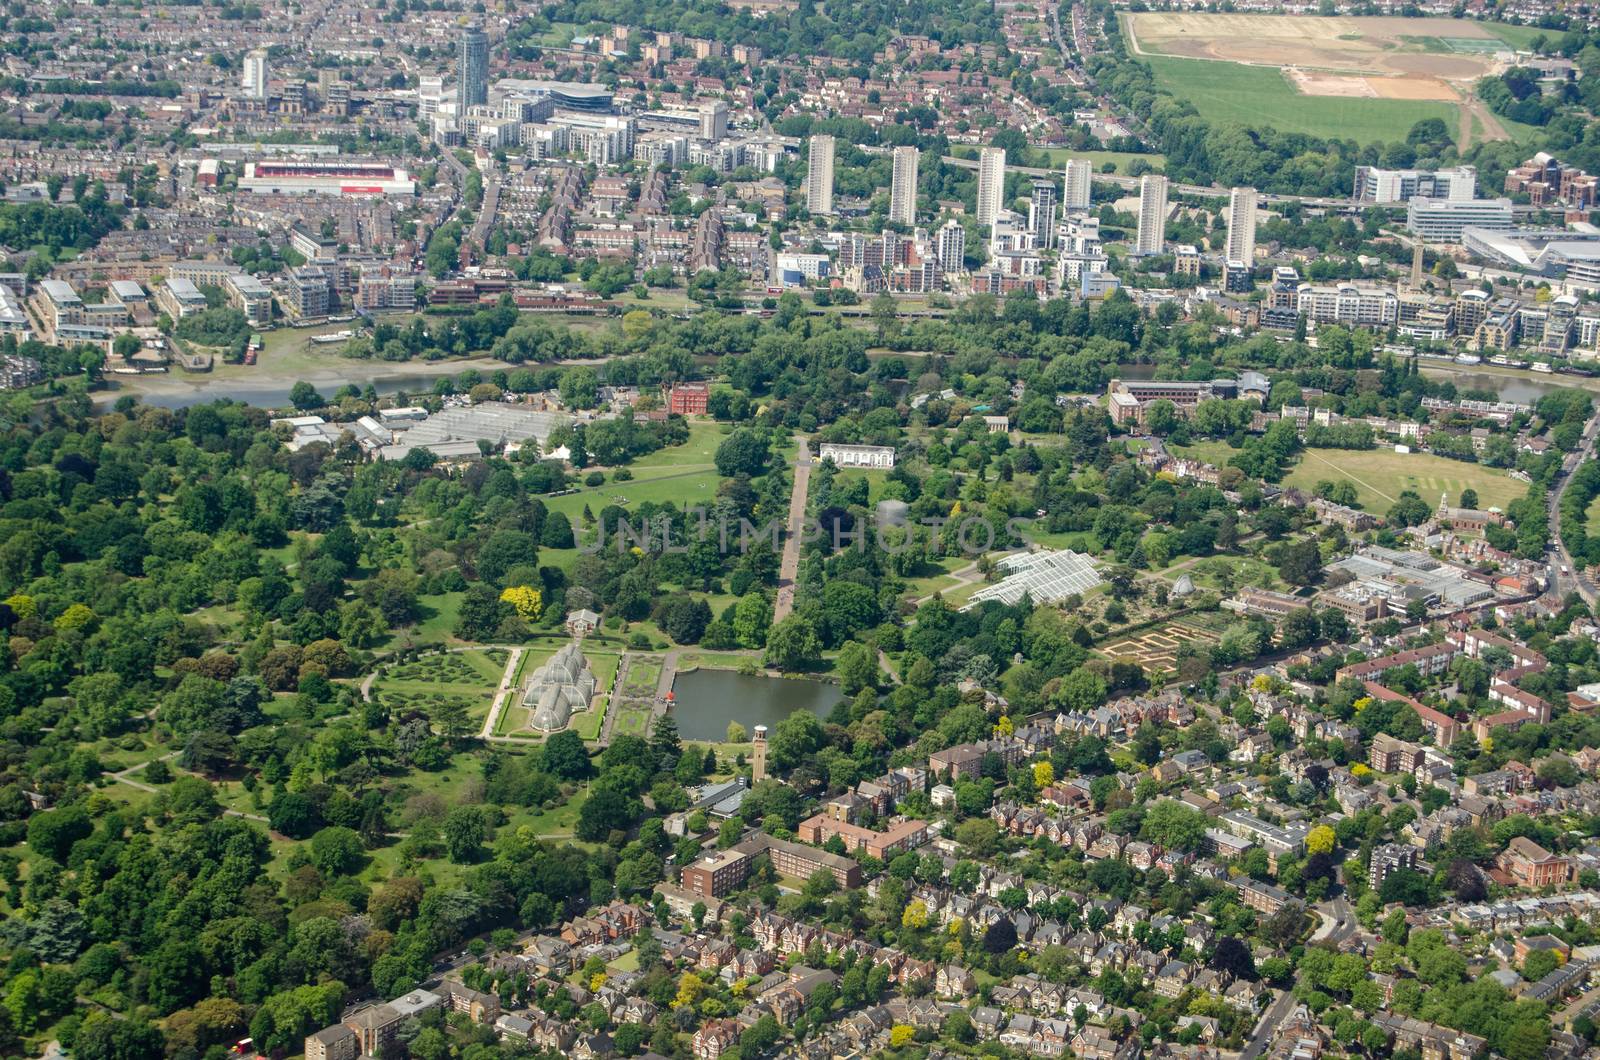 Aerial View of Kew Gardens, London by BasPhoto